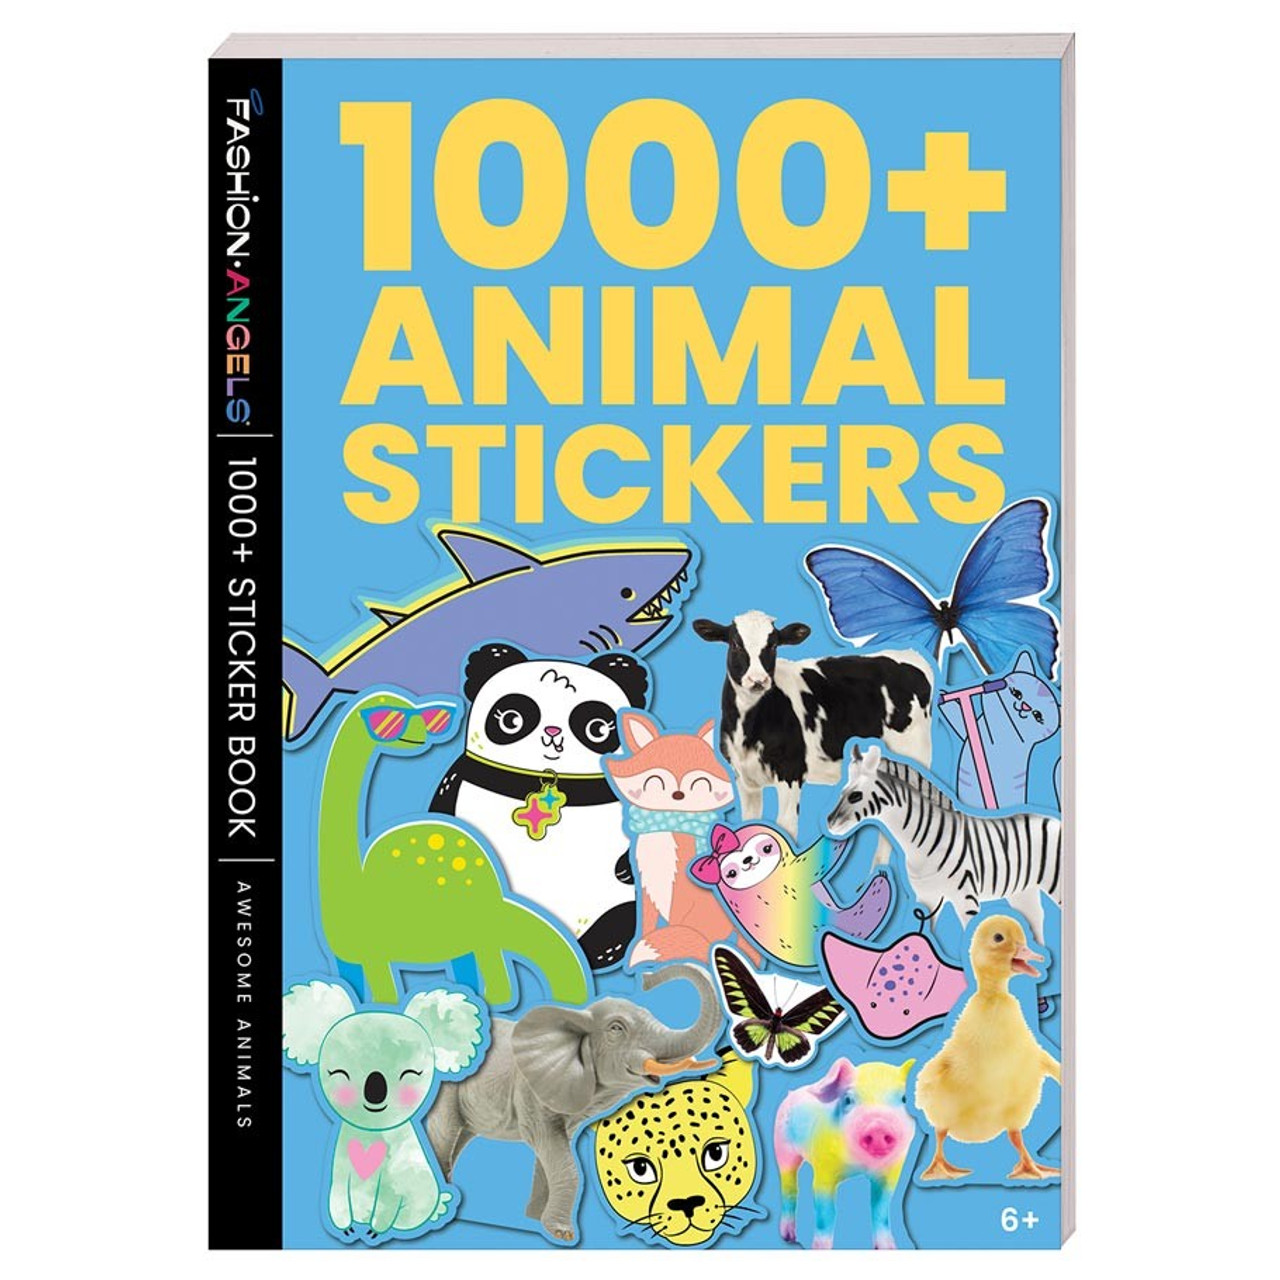 Animal 1000+ Super Stickers - Board Game Barrister